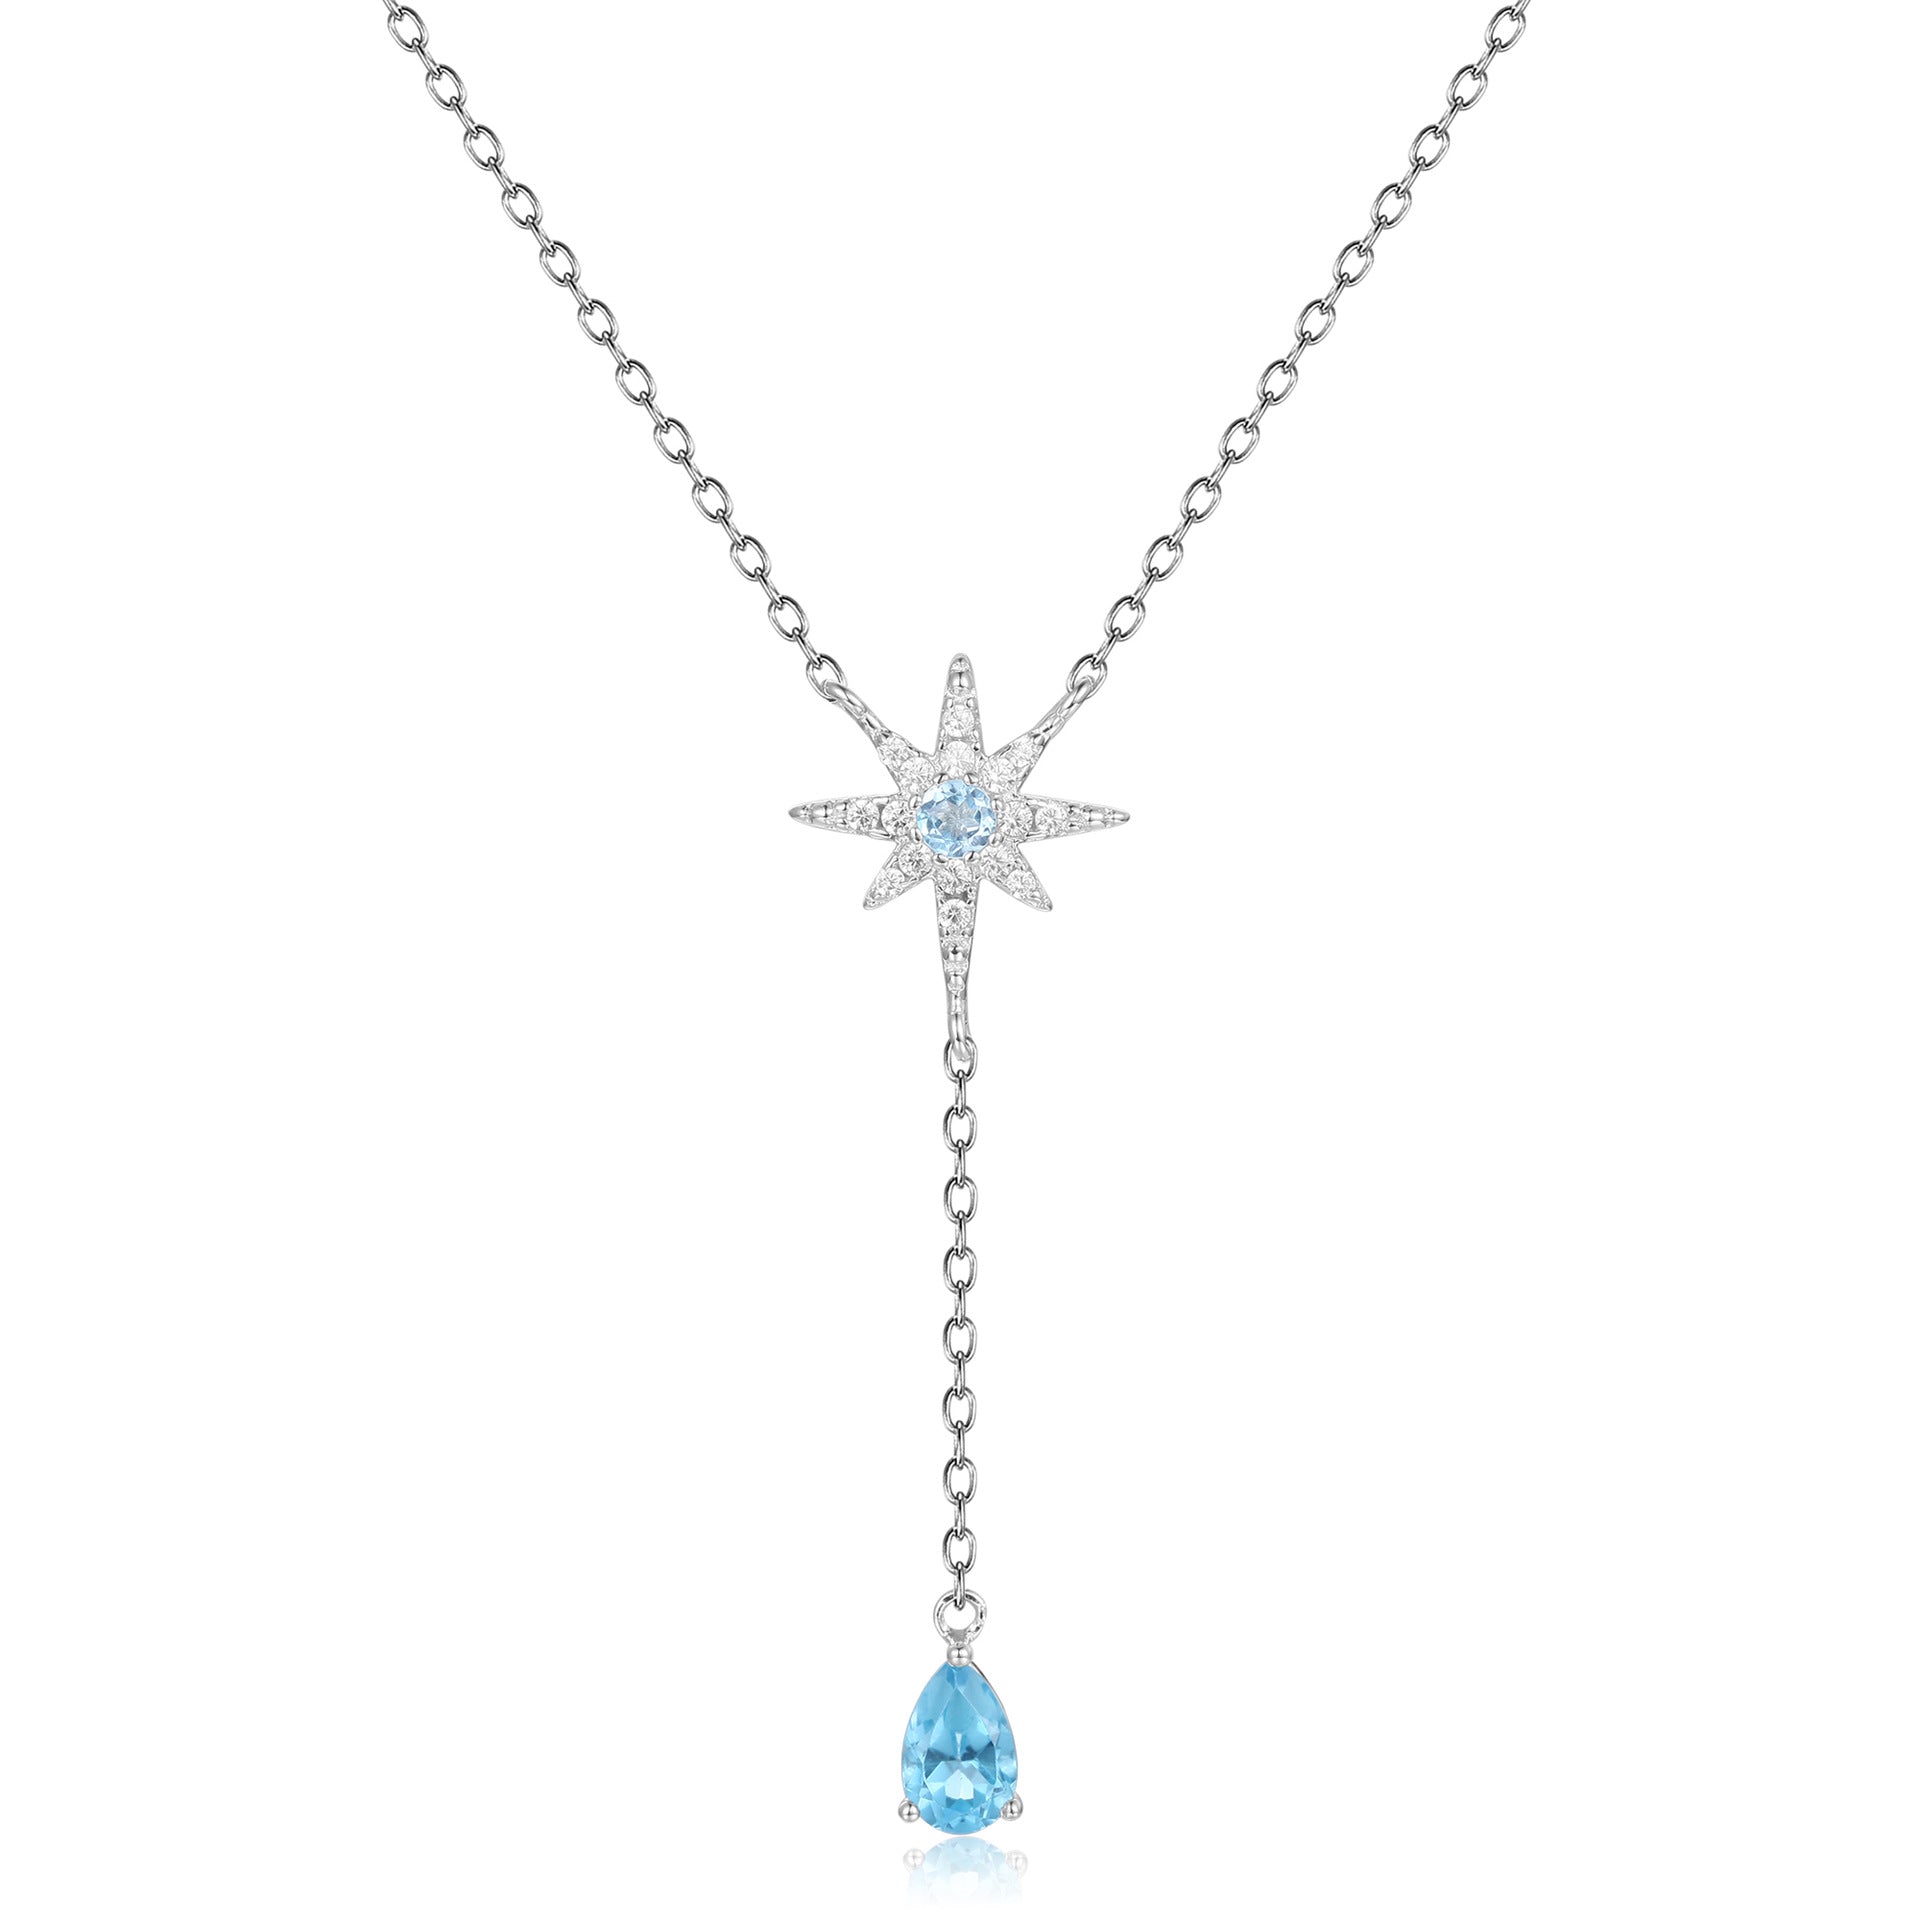 French Romantic Luxury Creative Design Inlaid Natural Topaz Star with Pear Drop Pendant Necklace for Women